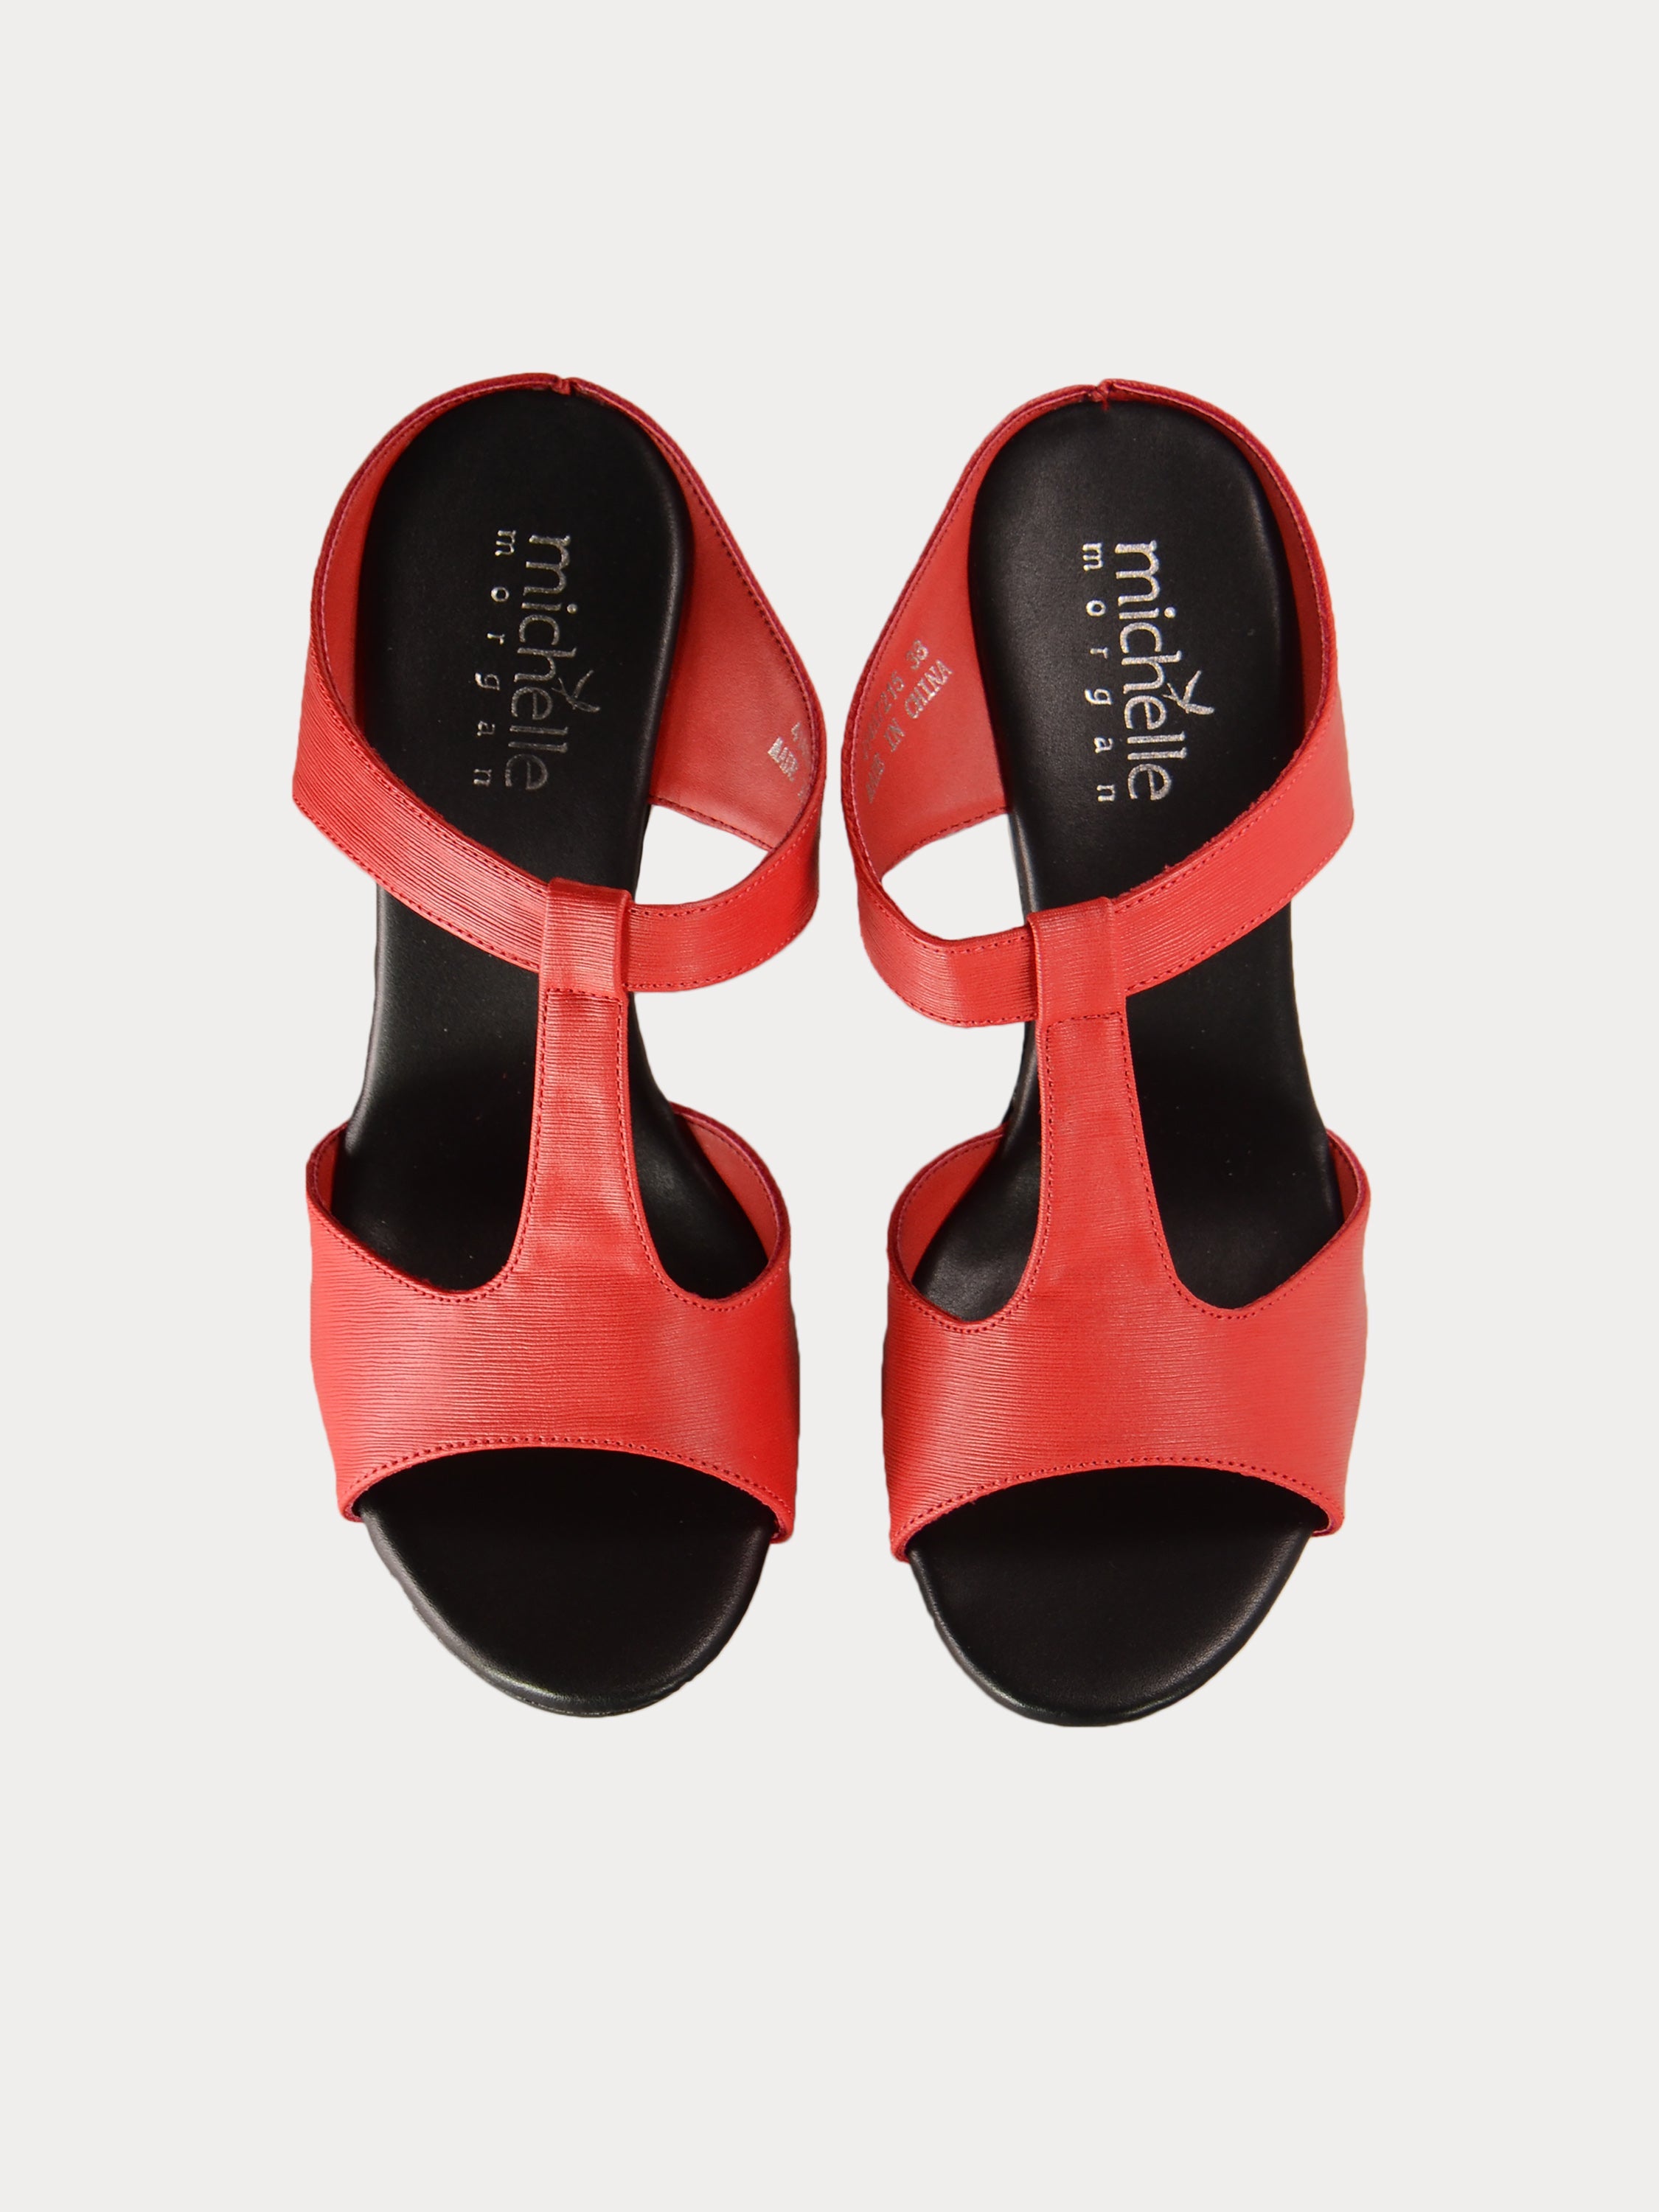 Michelle Morgan 414A7215 Anelize Heeled Sandals #color_Red